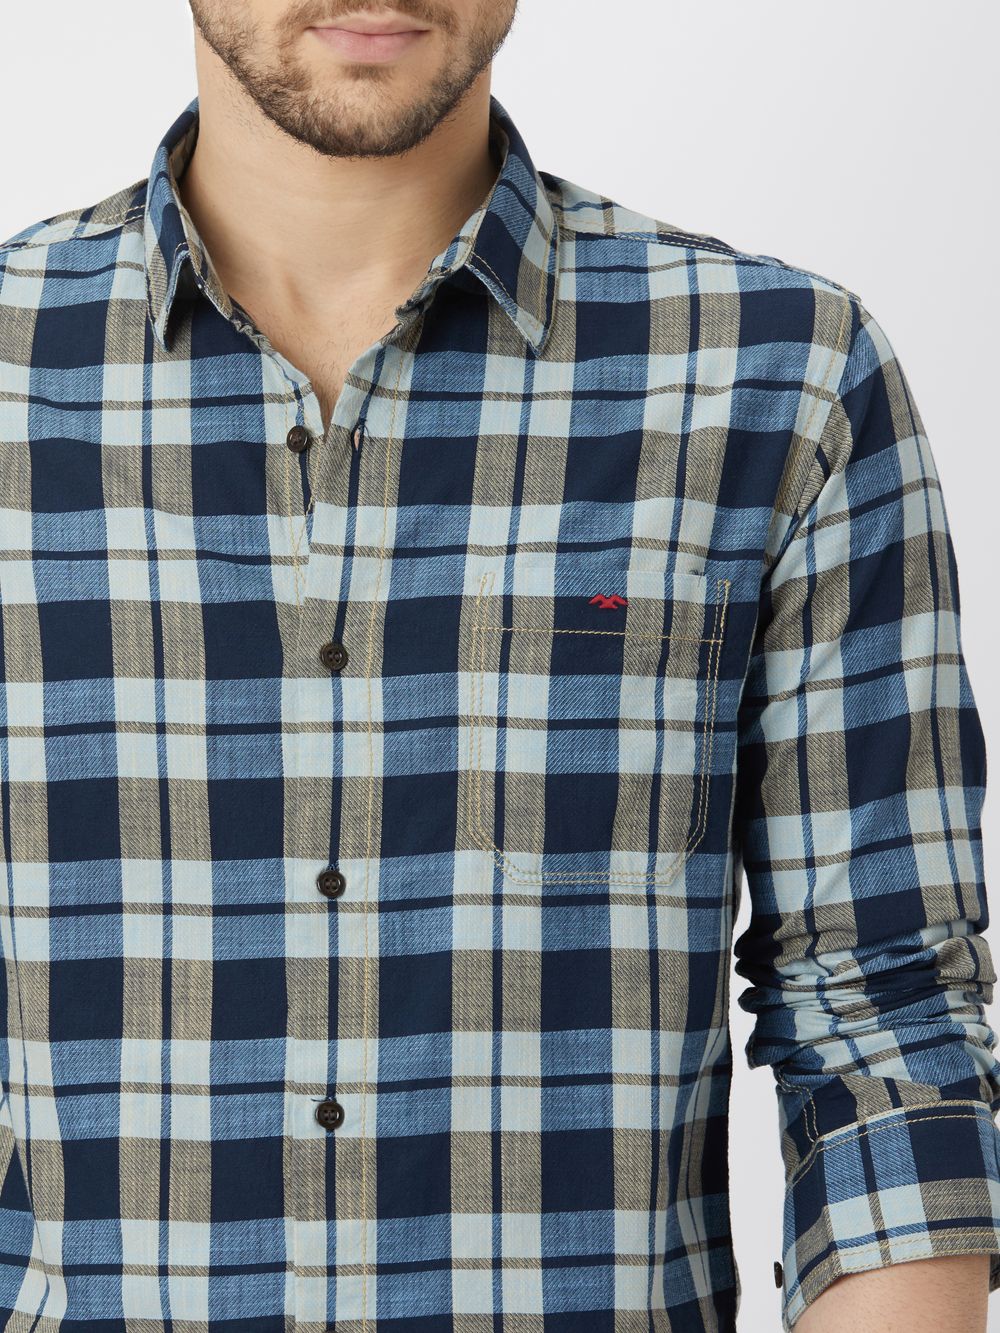 Navy & Beige Large Check Shirt